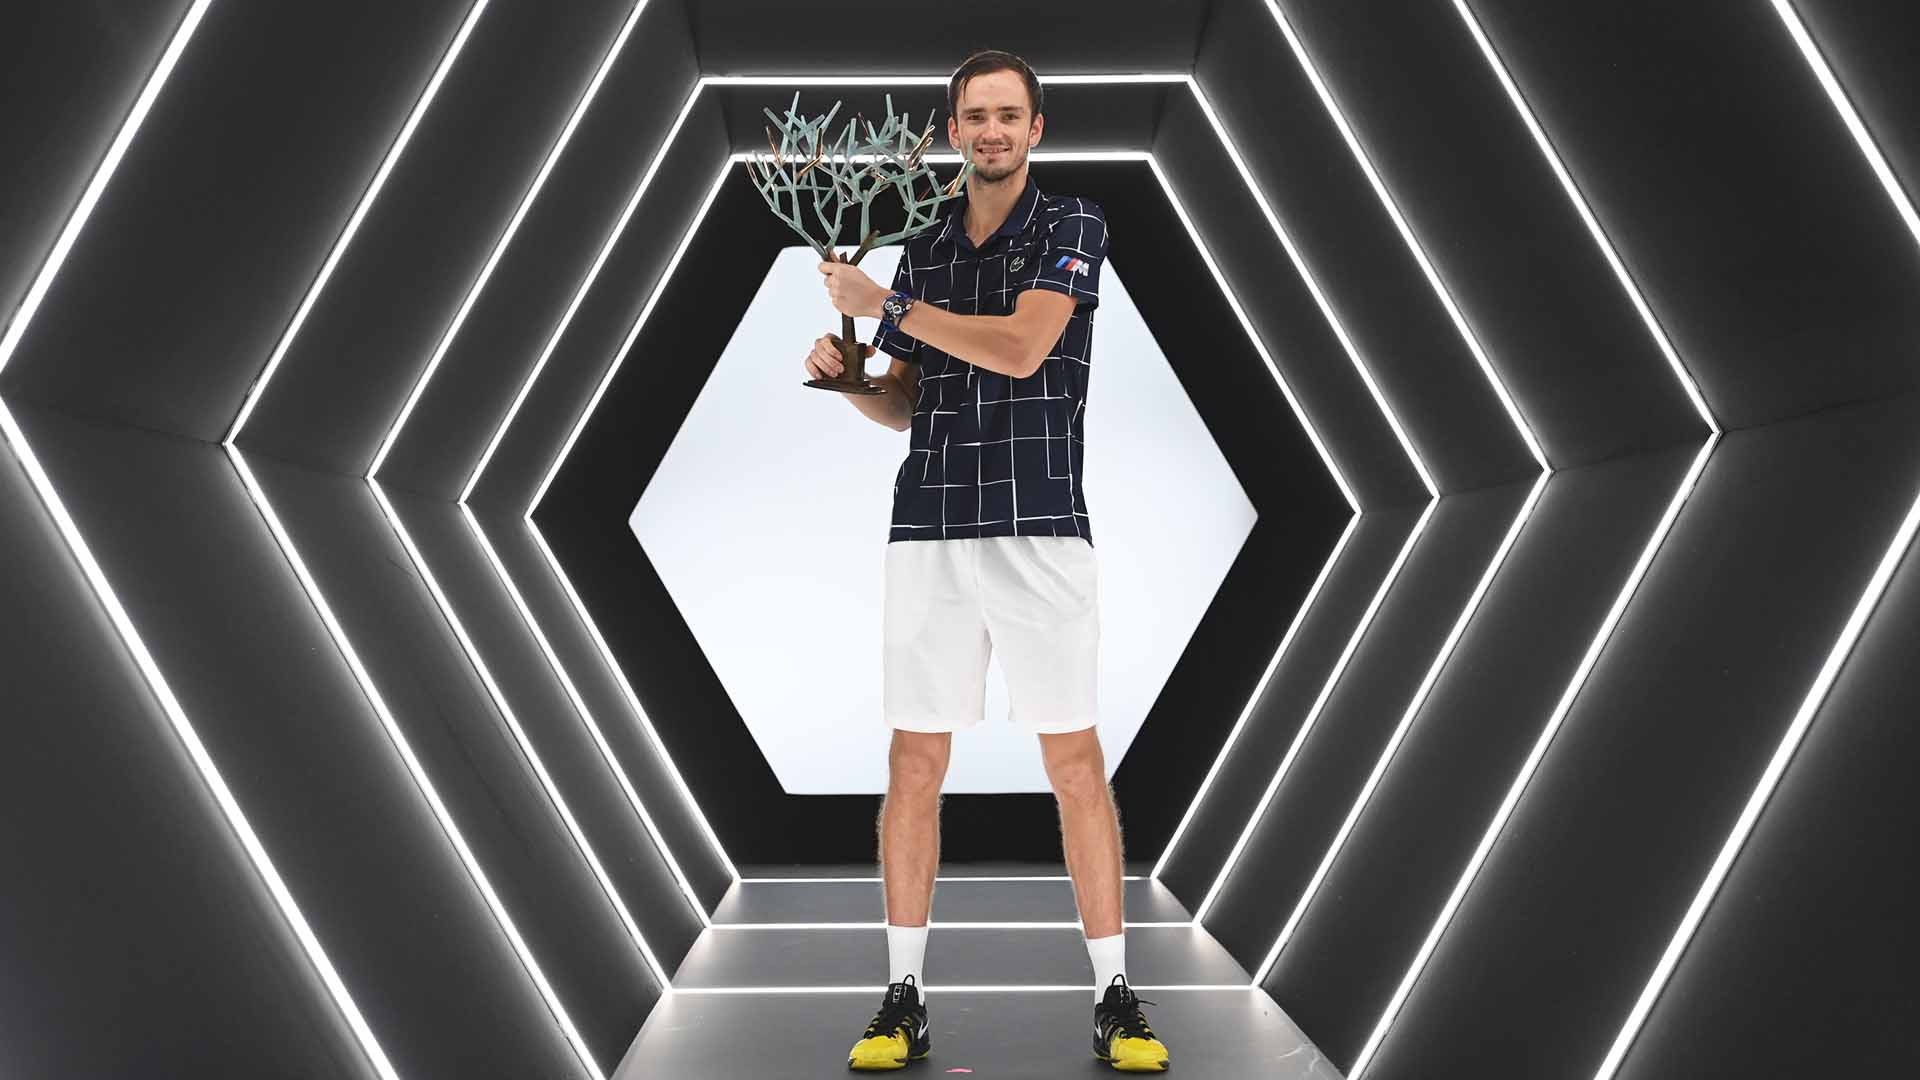 Daniil Medvedev owns a 3-1 record in ATP Masters 1000 finals.